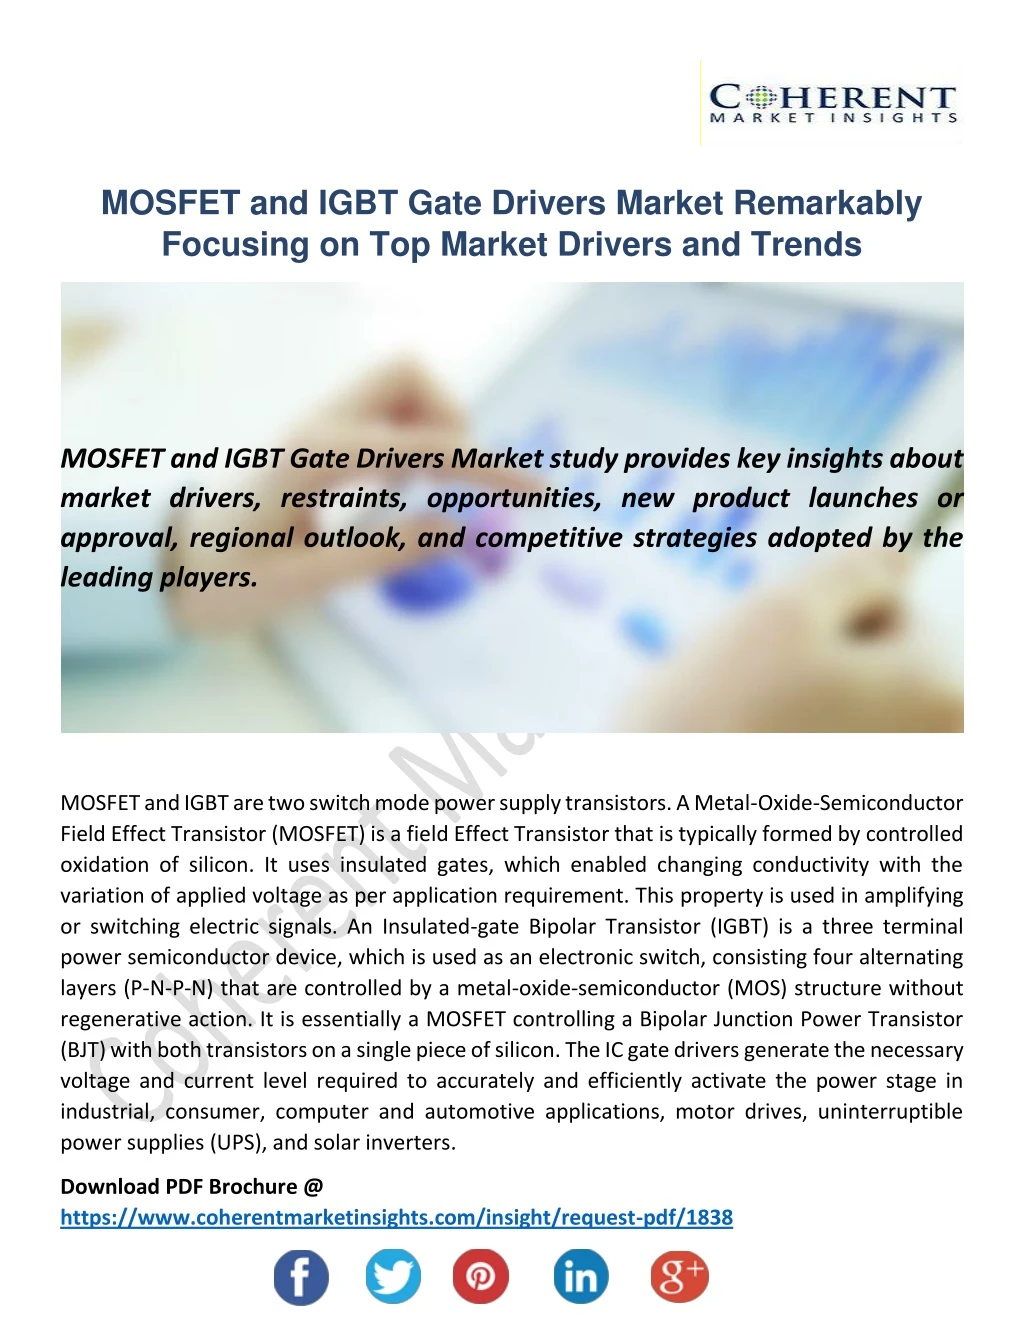 mosfet and igbt gate drivers market remarkably